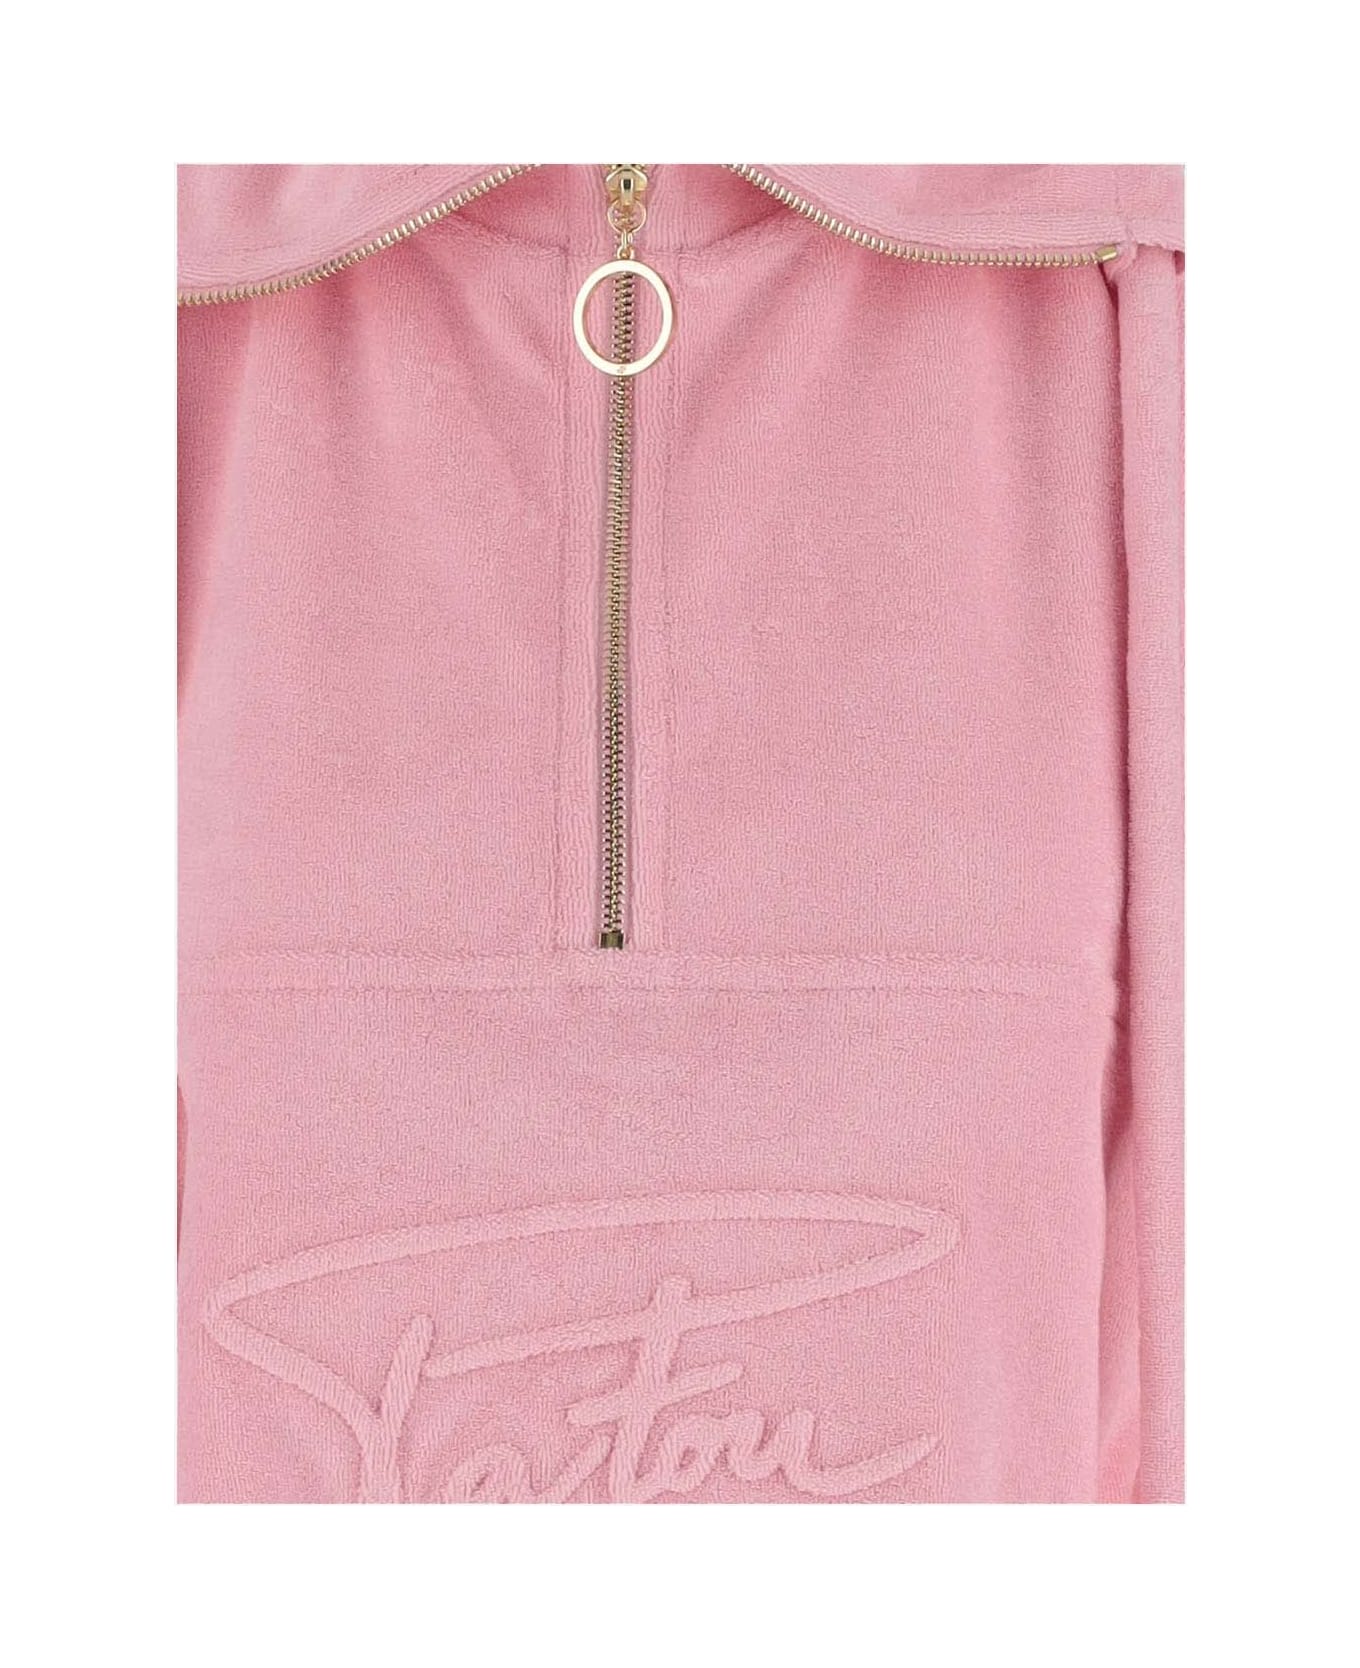 Patou Cotton Sweatshirt With Embossed Patou Signature - Pink フリース